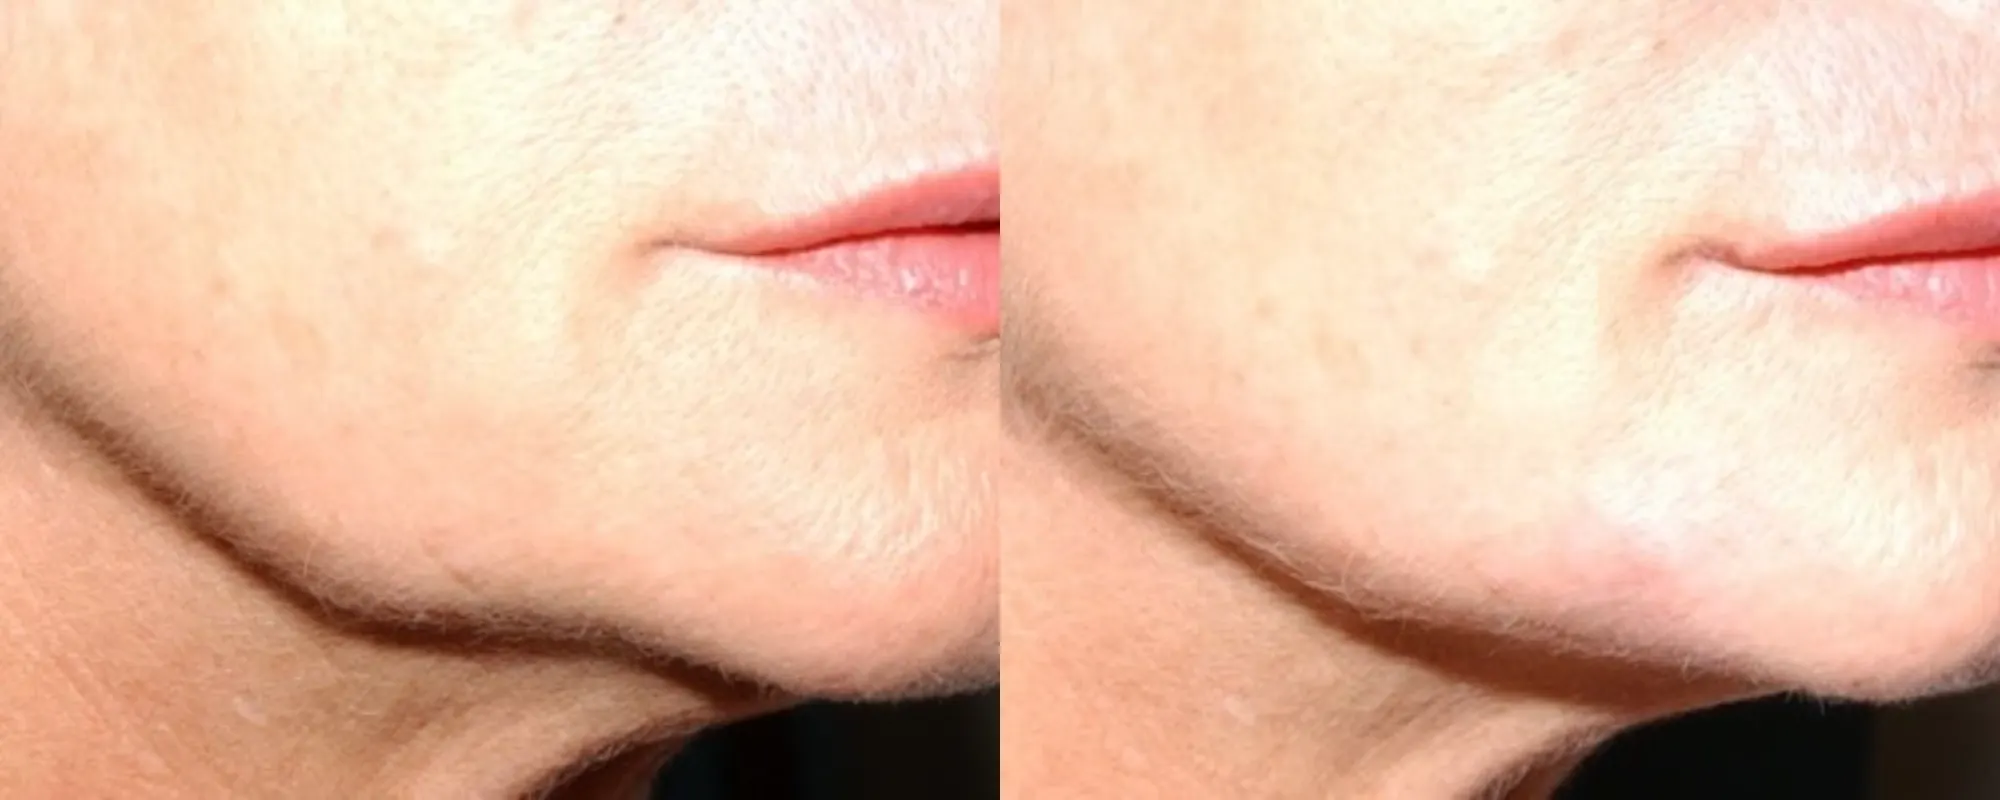 Juvederm to improve jawline